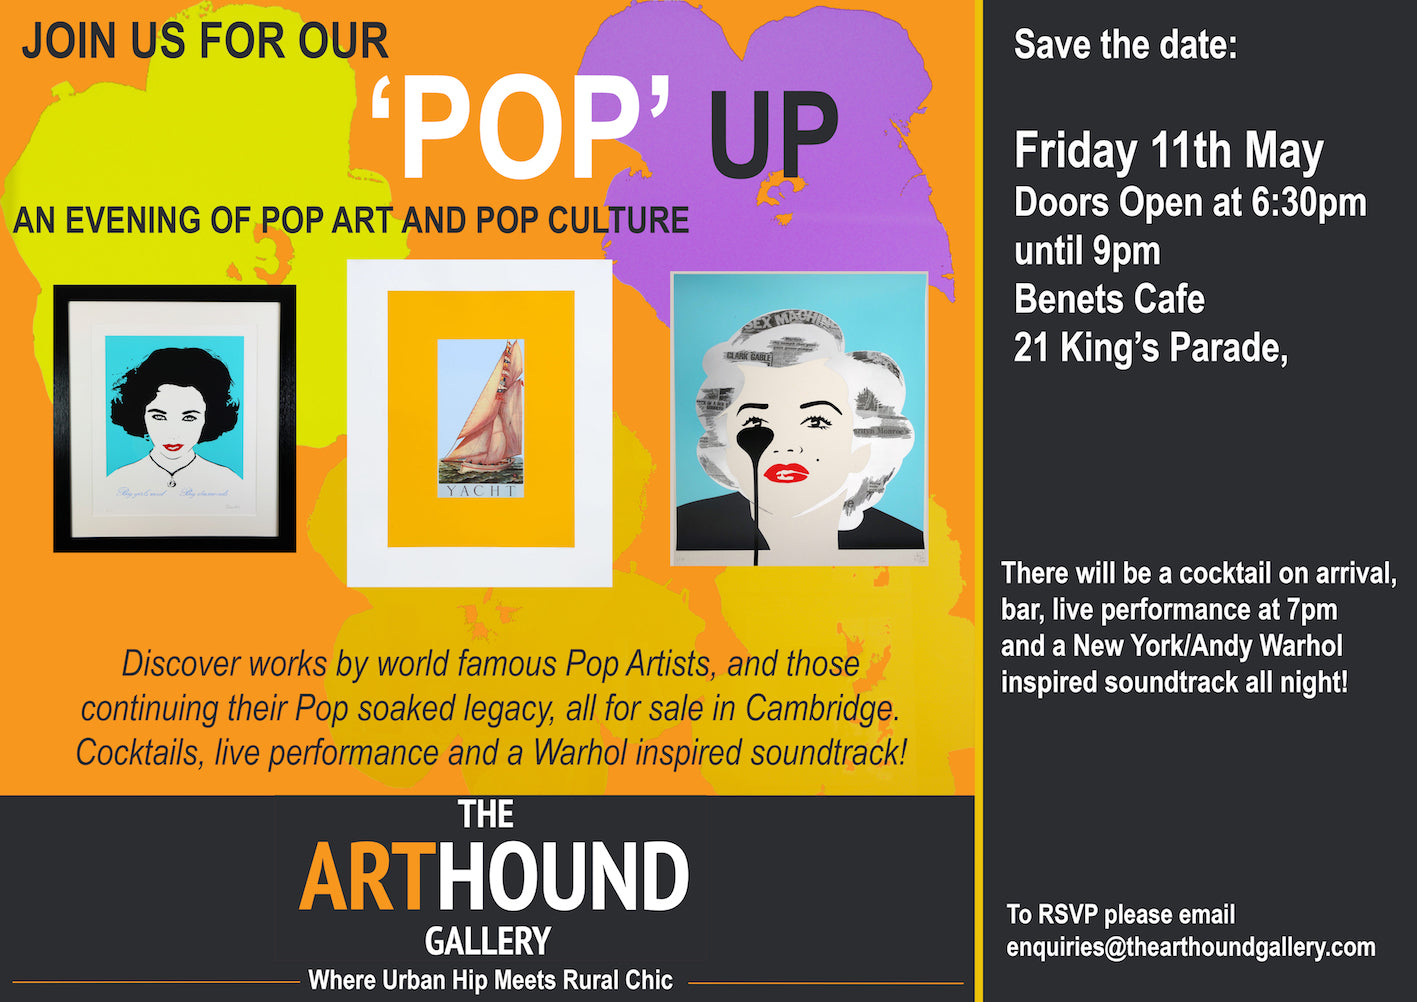 The Art Hound 'Pop' Up! Friday 11th May 2018 - Join us!